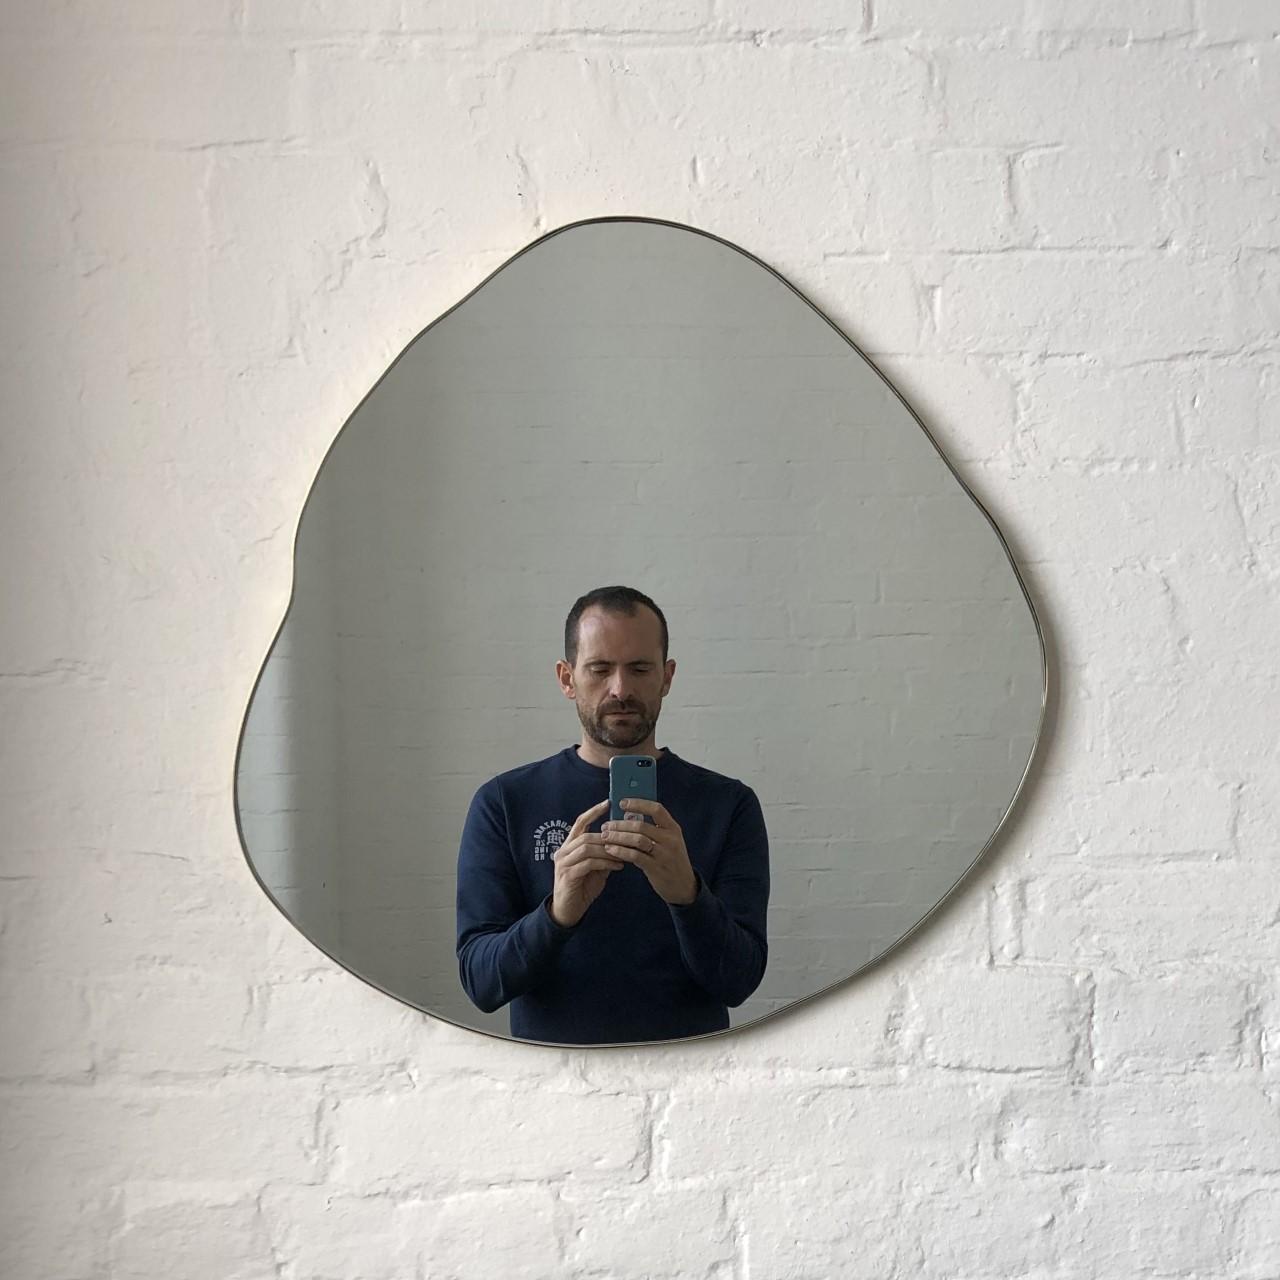 British Ergon Organic Shaped Modern Mirror with a Brass Frame, Large For Sale